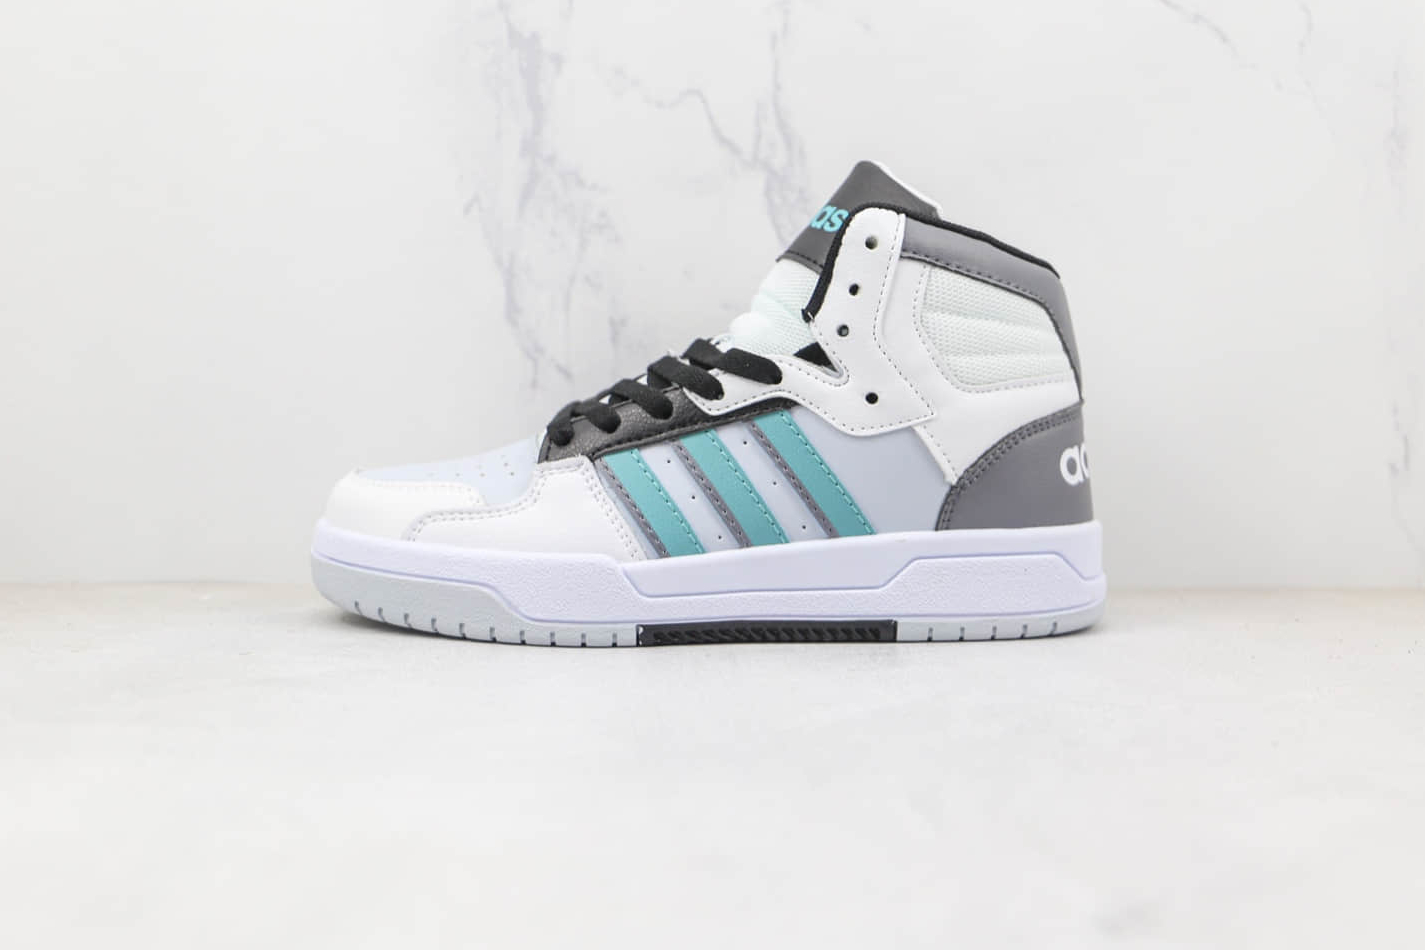 Adidas Neo Entrap Mid GX3794 - Stylish and Comfortable Sneakers